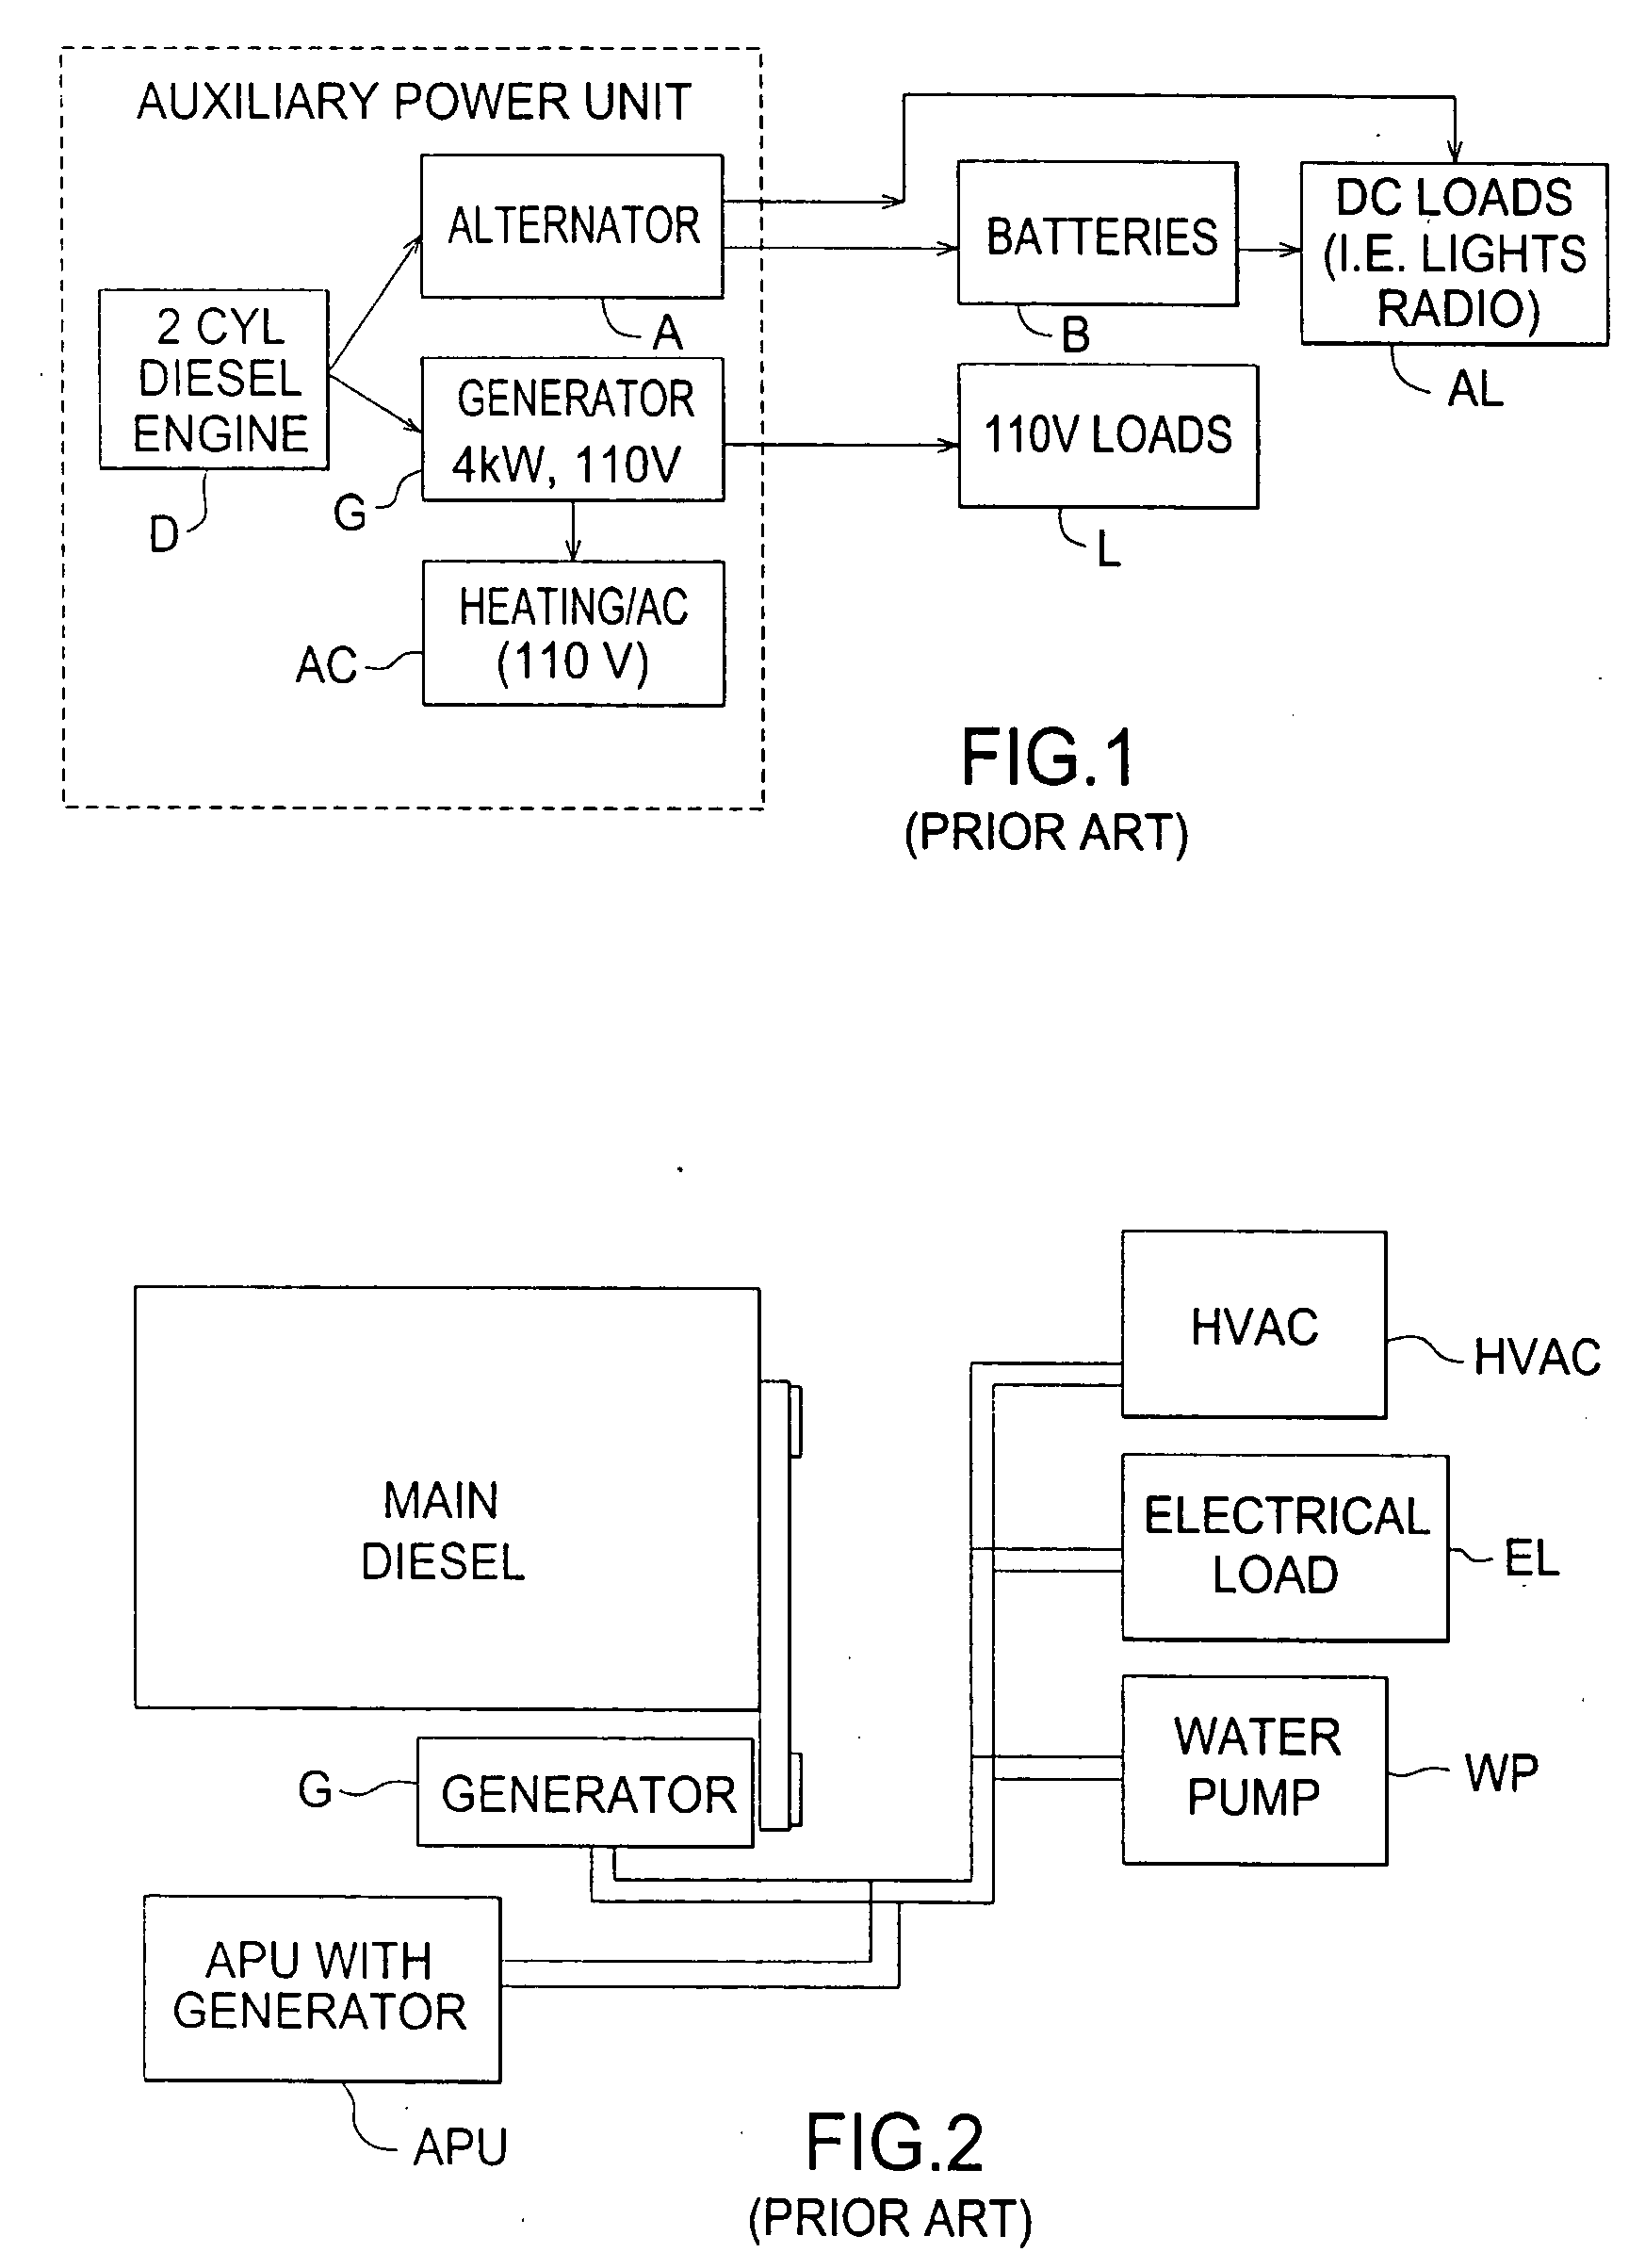 Auxiliary power system for a motor vehicle